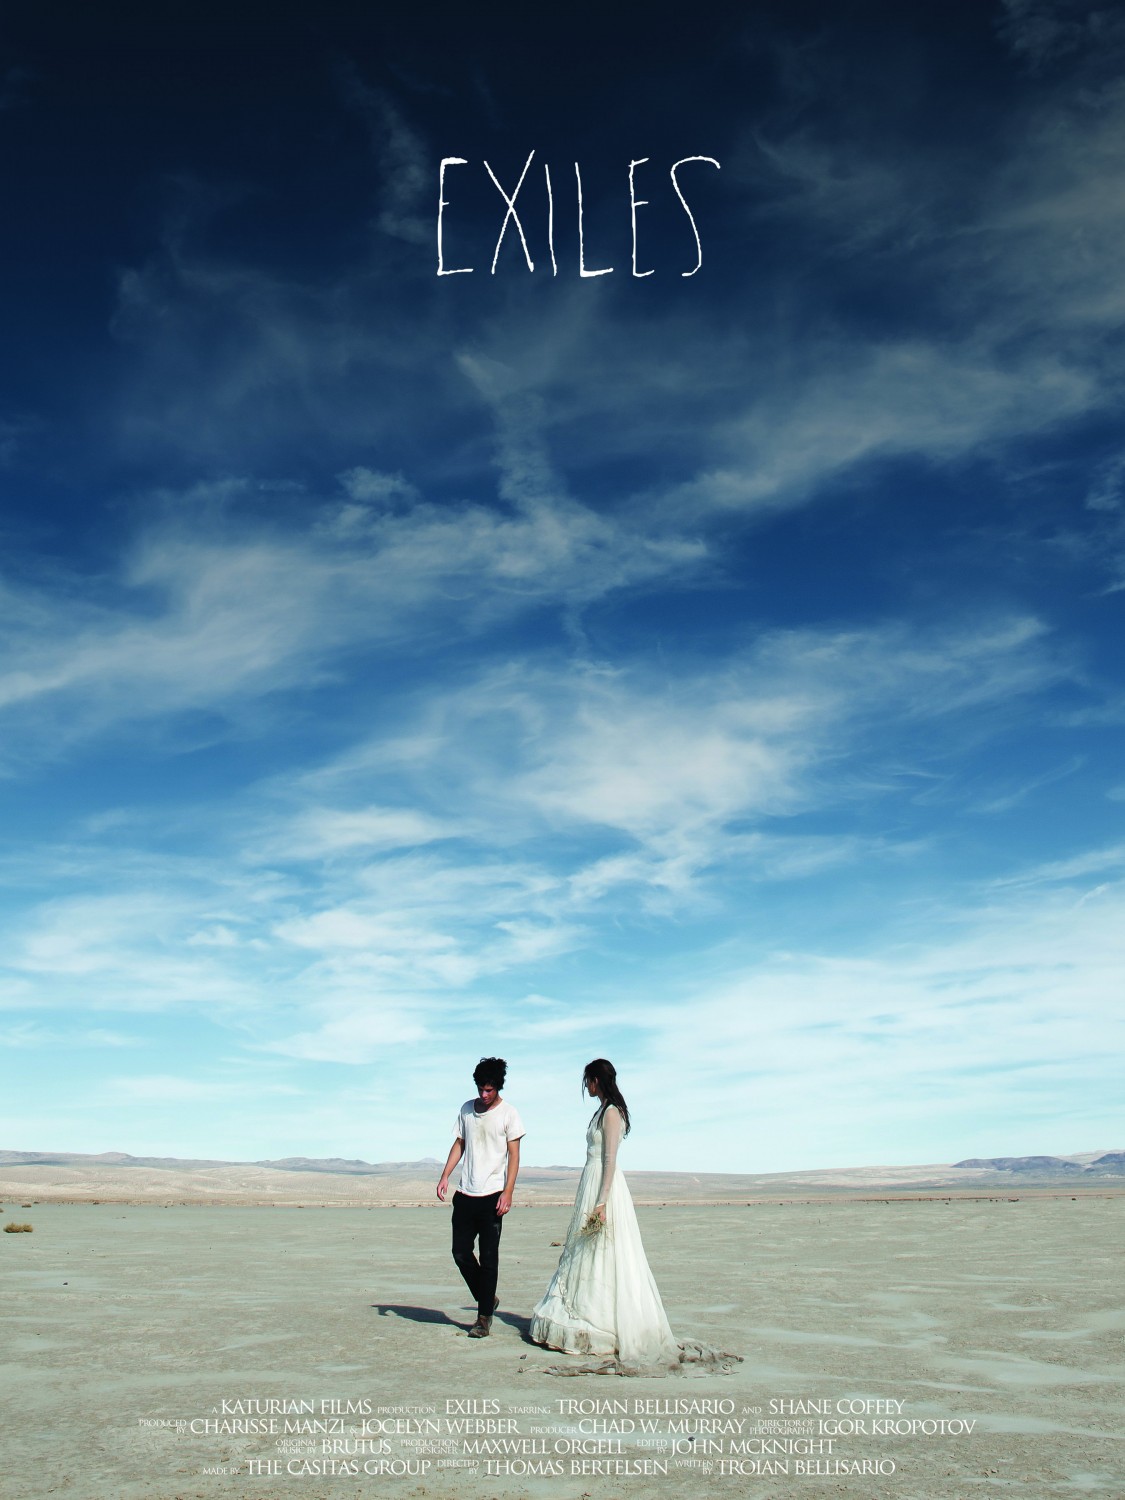 Extra Large Movie Poster Image for Exiles